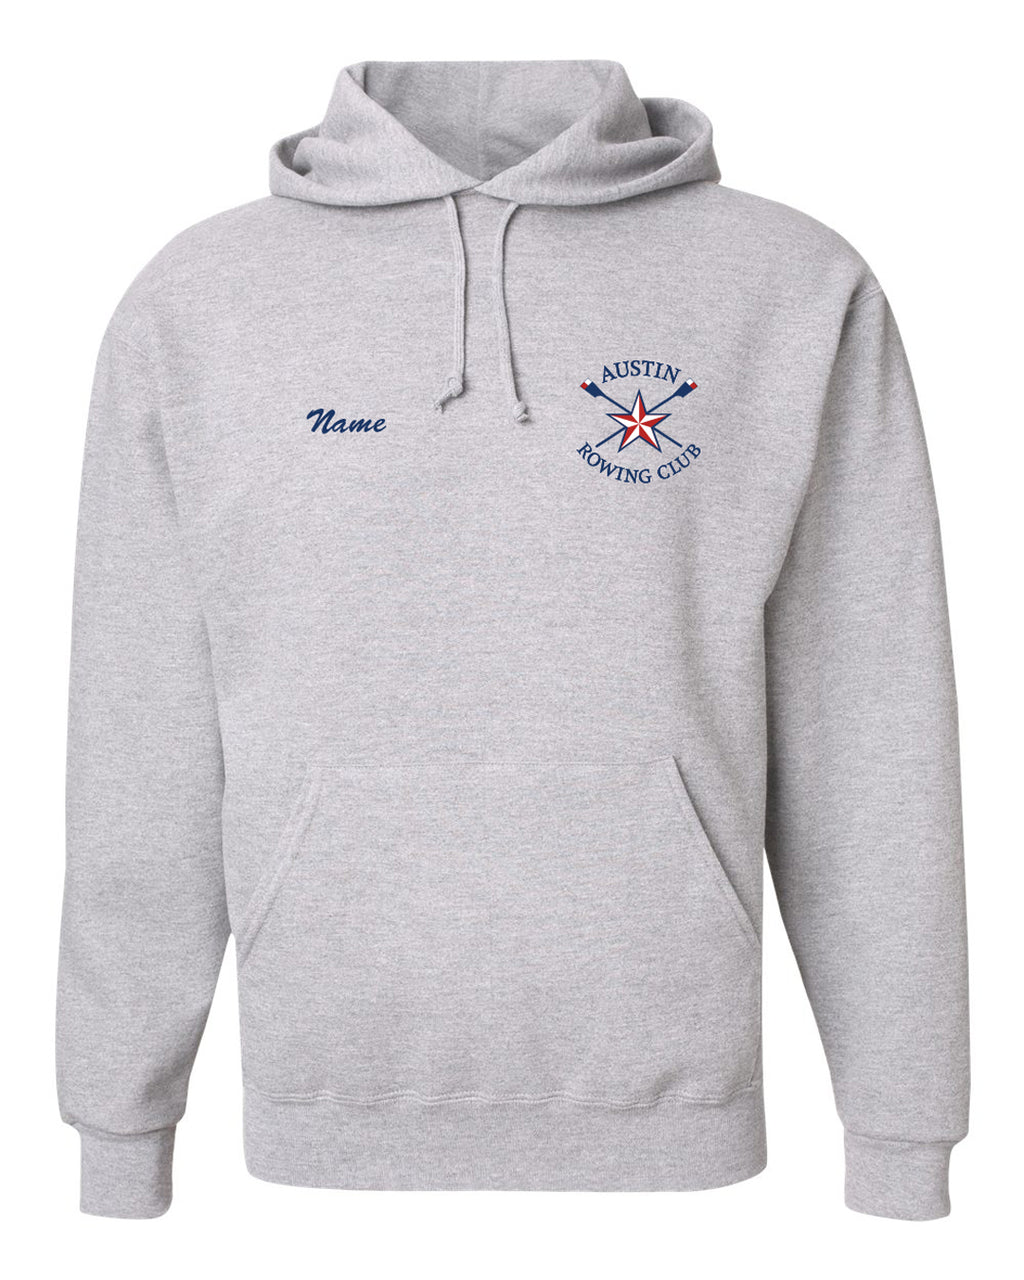 50/50 Hooded Austin Rowing Club Pullover Sweatshirt (embroidered)